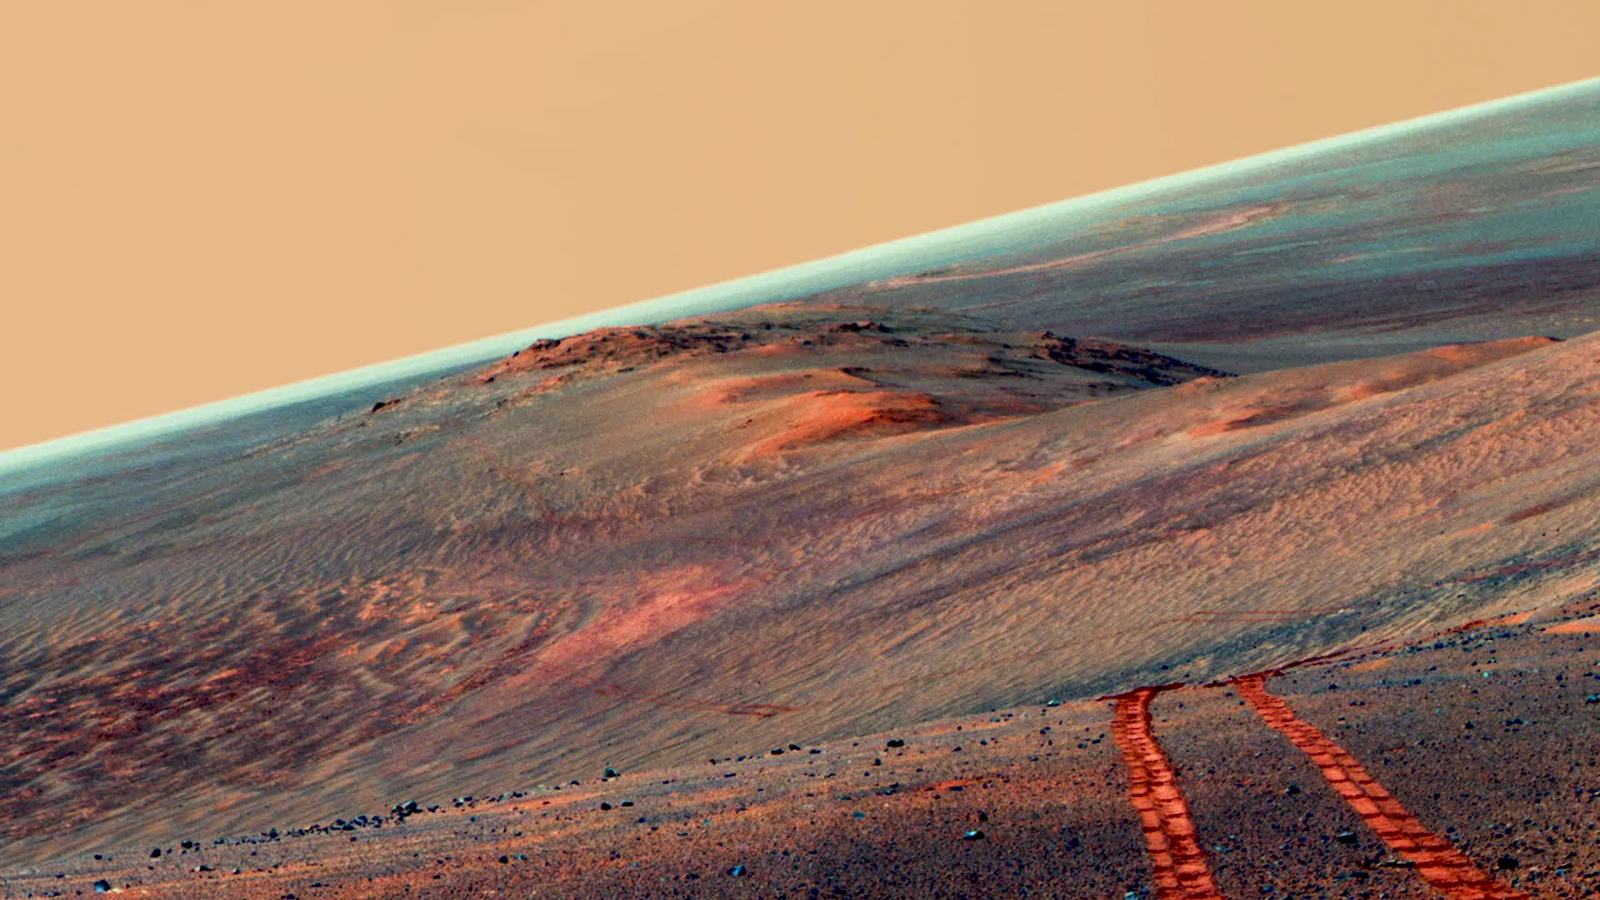 Built to last 90 days, Mars rover Opportunity ends mission after 15 years | Cornell Chronicle